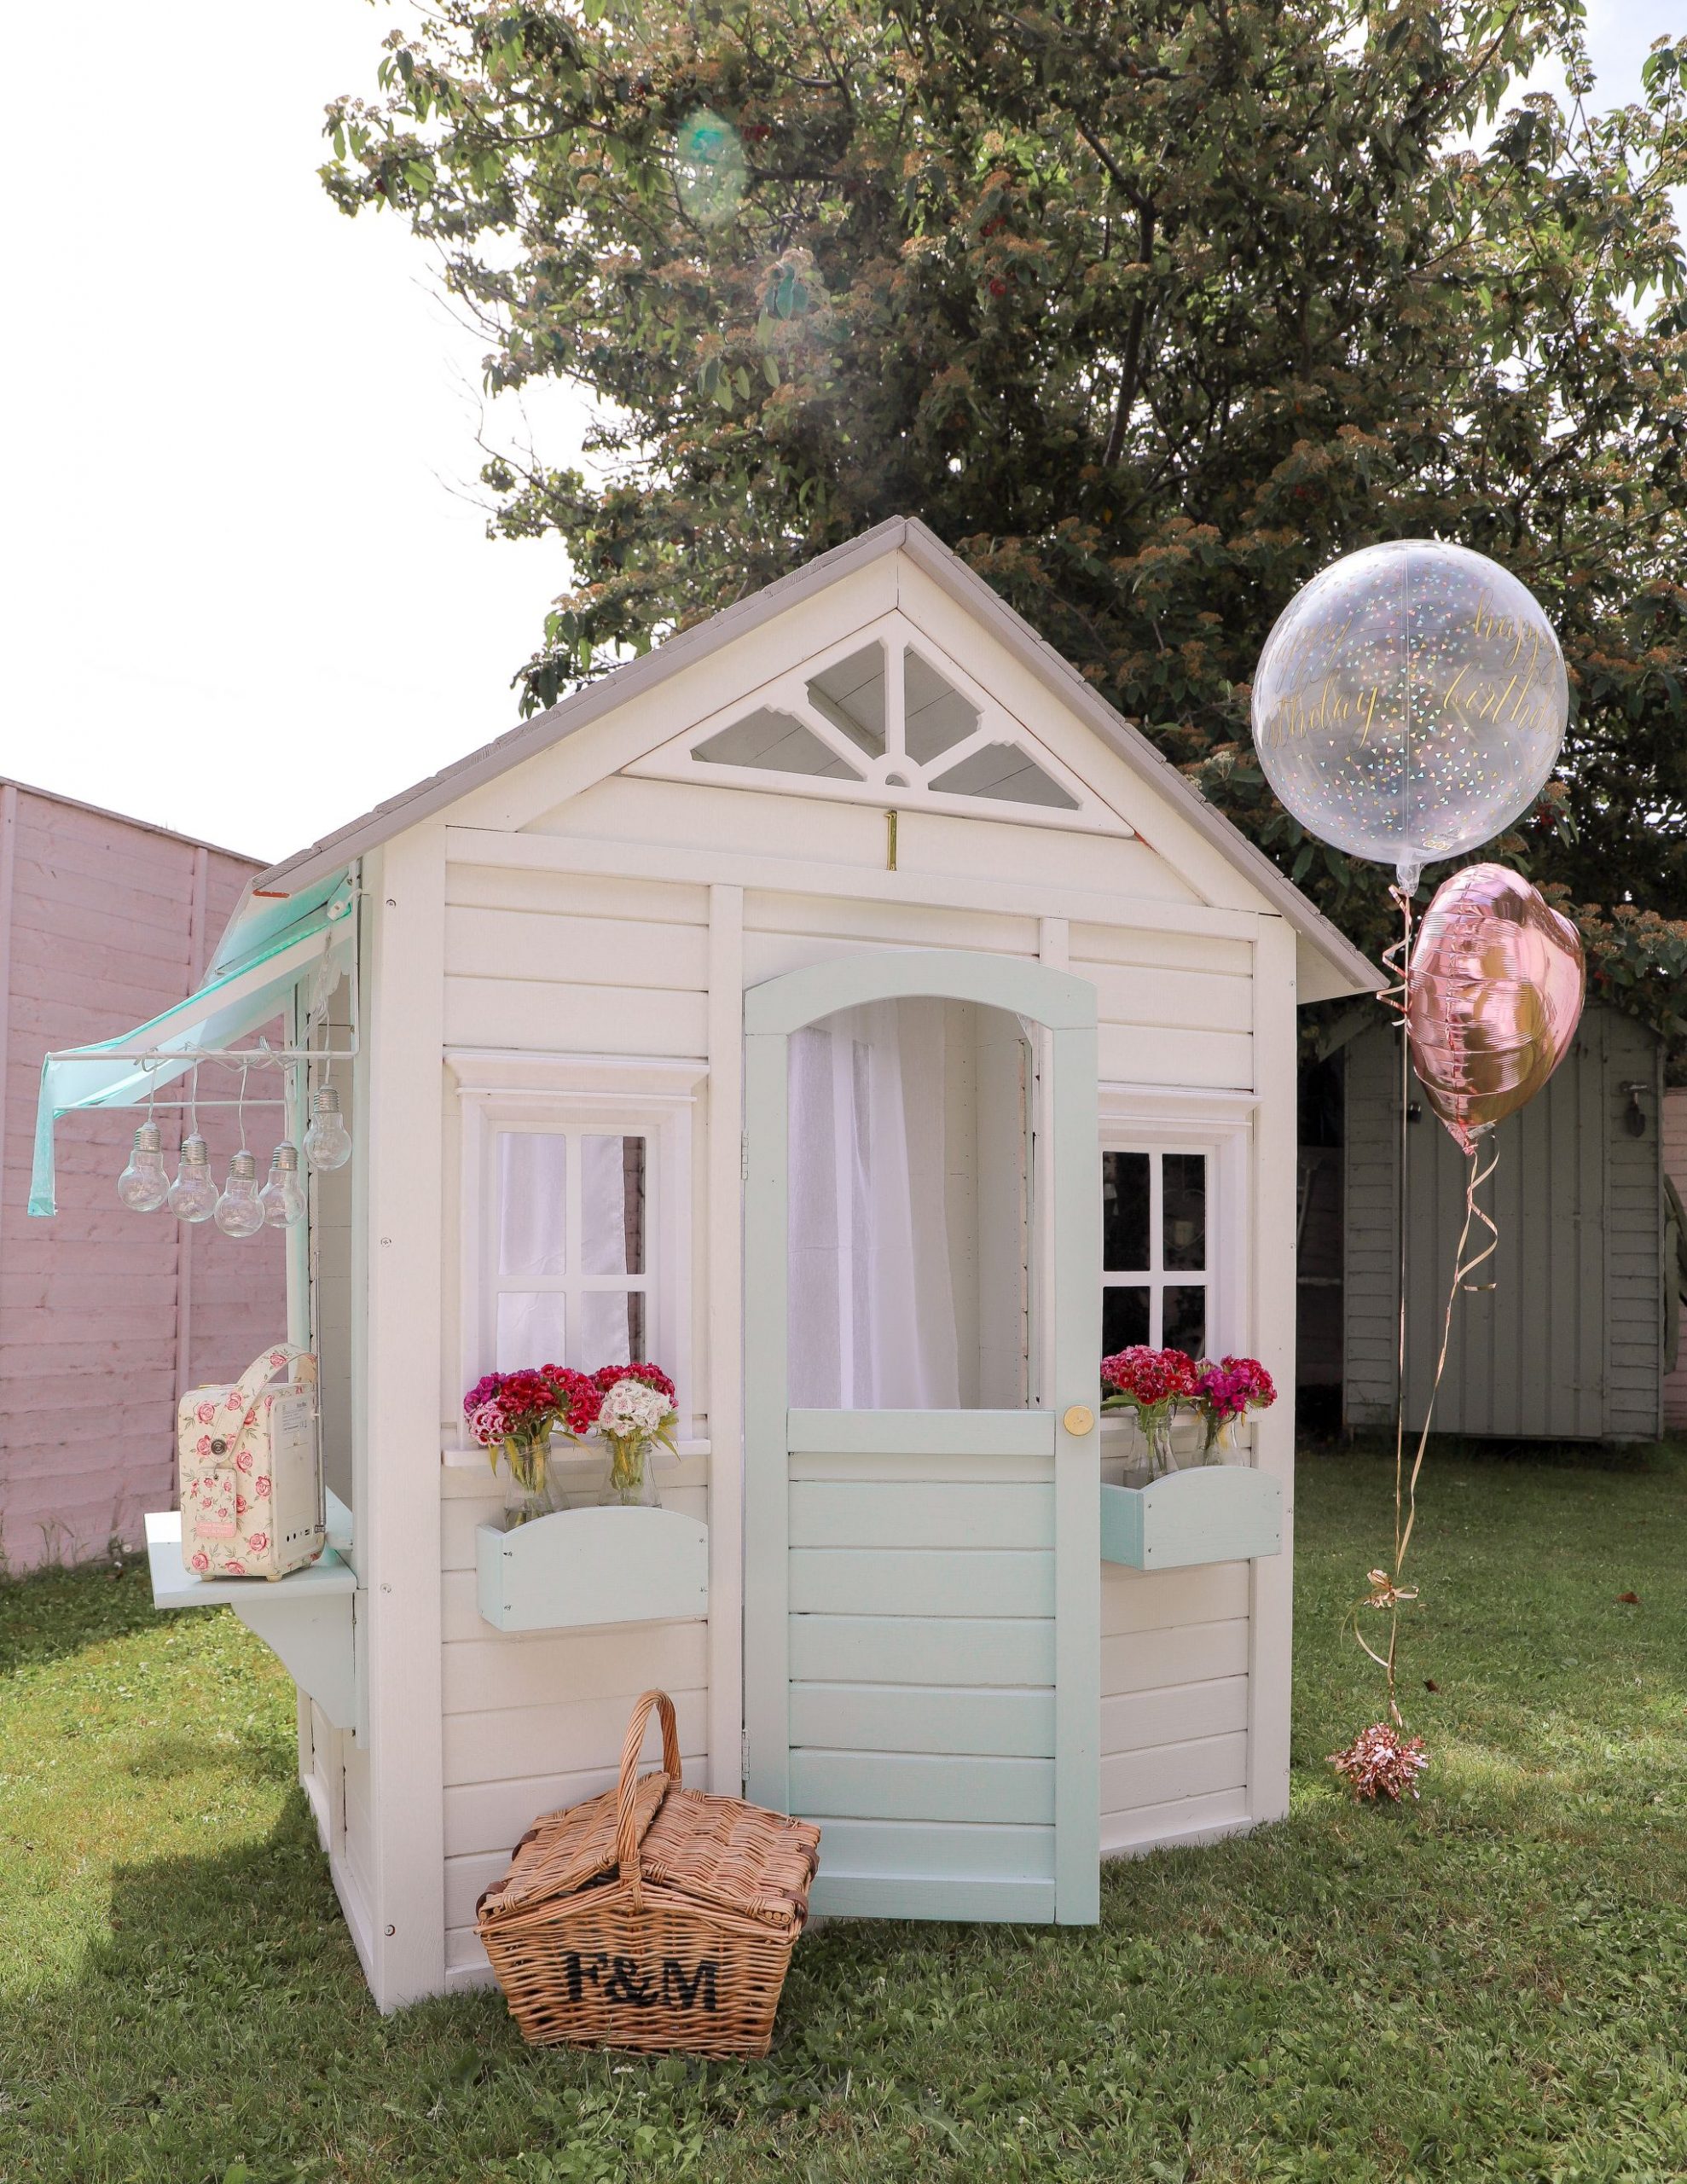 Cubby playhouse makeover